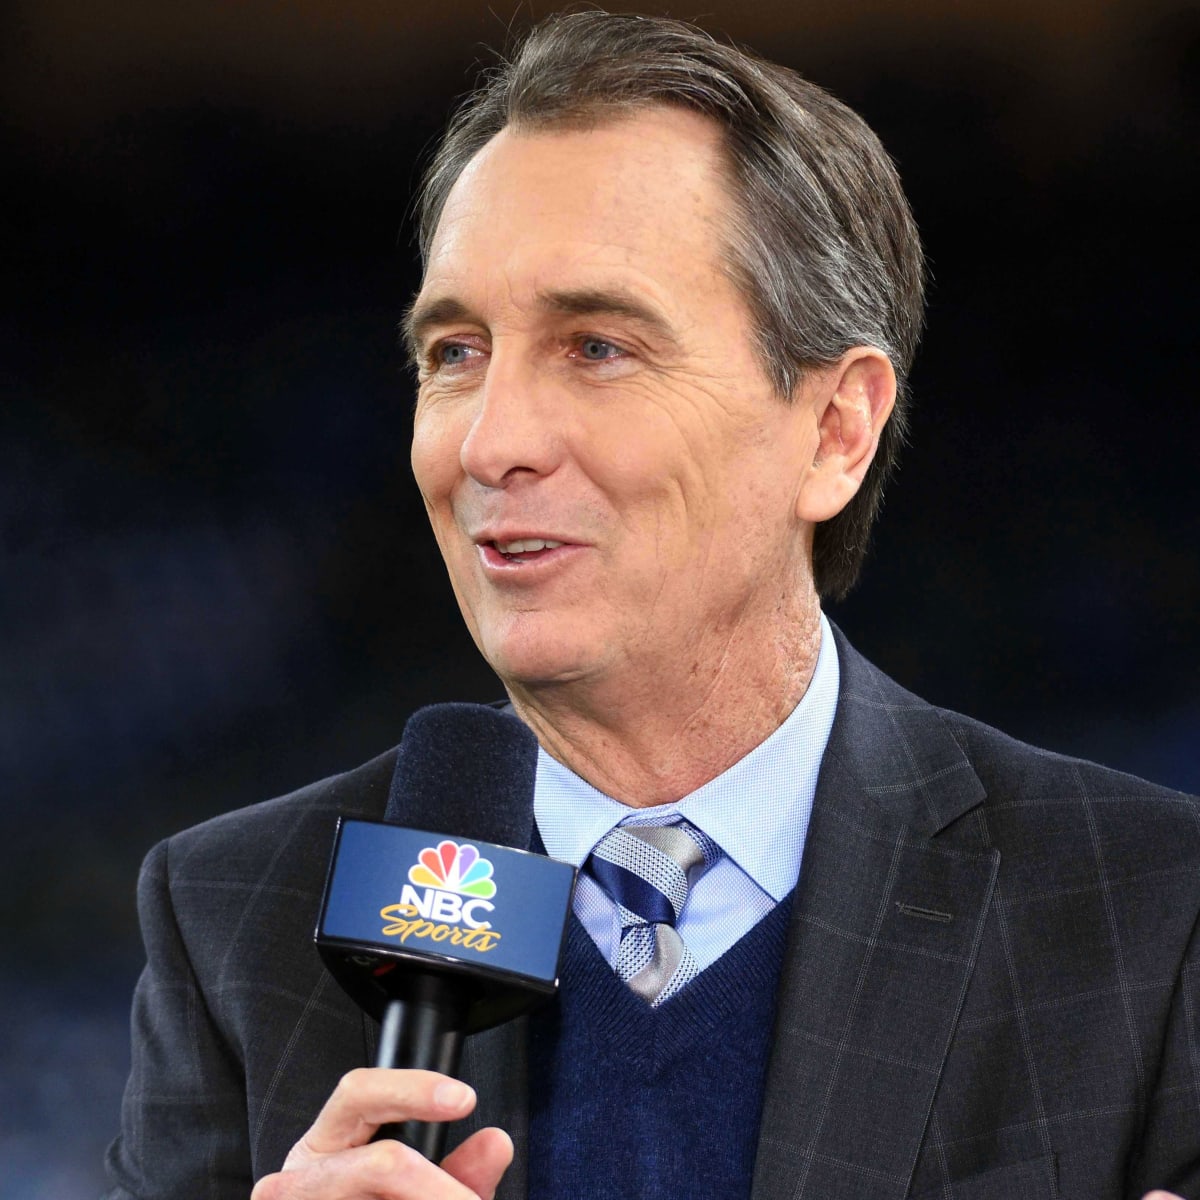 Cris Collinsworth apologizes for sexist on-air comments - Sports